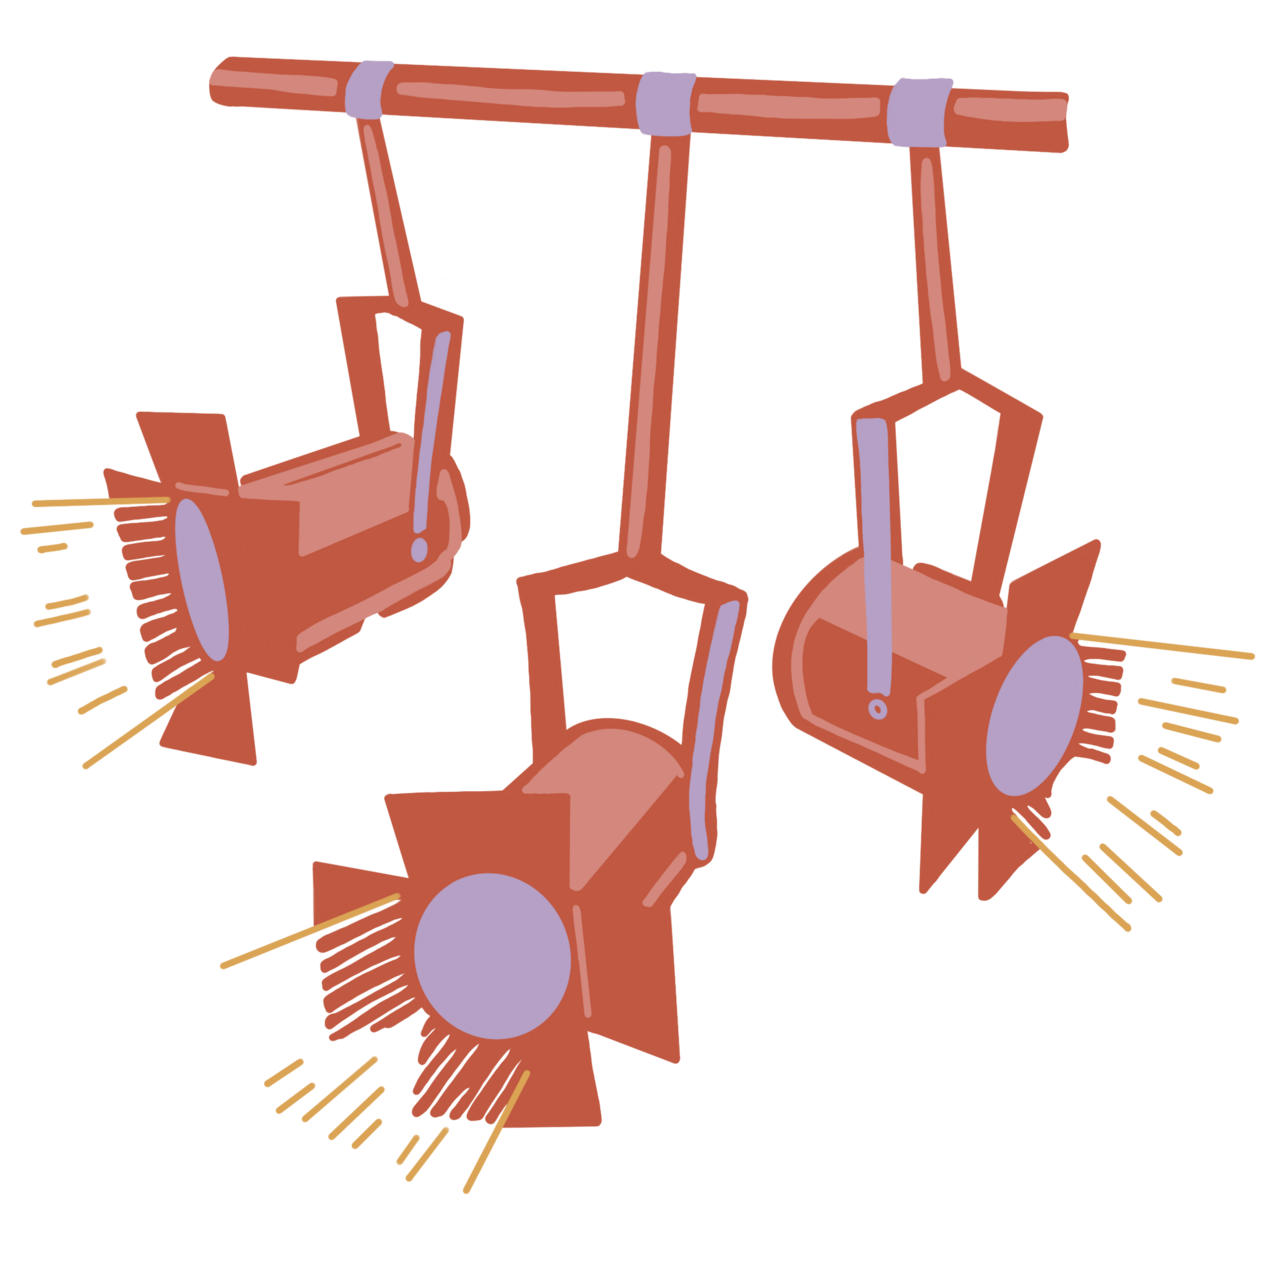 An illustration of some stage lights